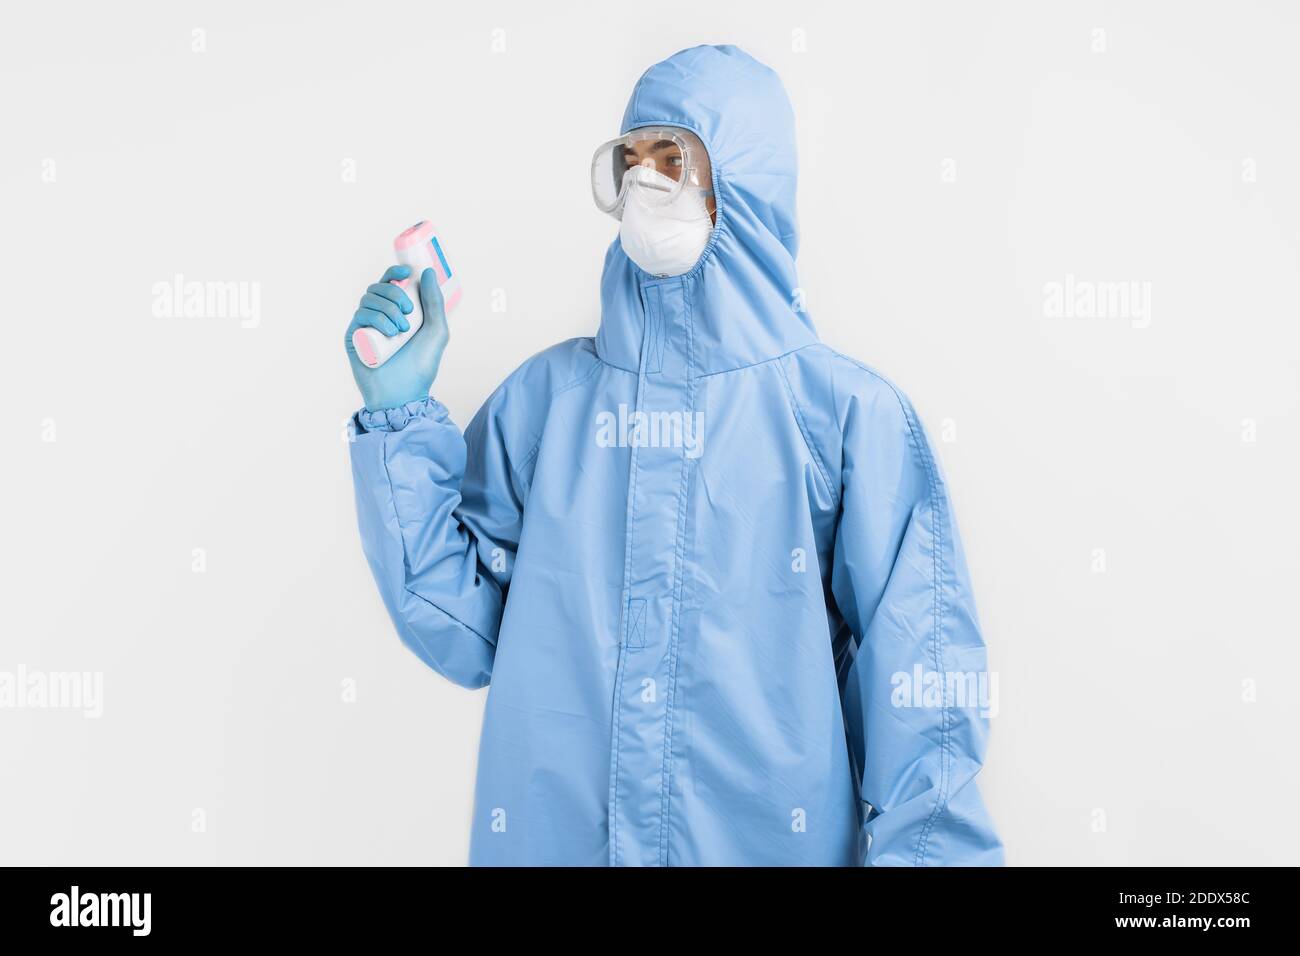 doctor in a protective suit from the coronavirus, a medical mask glasses and gloves, uses an infrared non-contact thermometer gun to check body temper Stock Photo